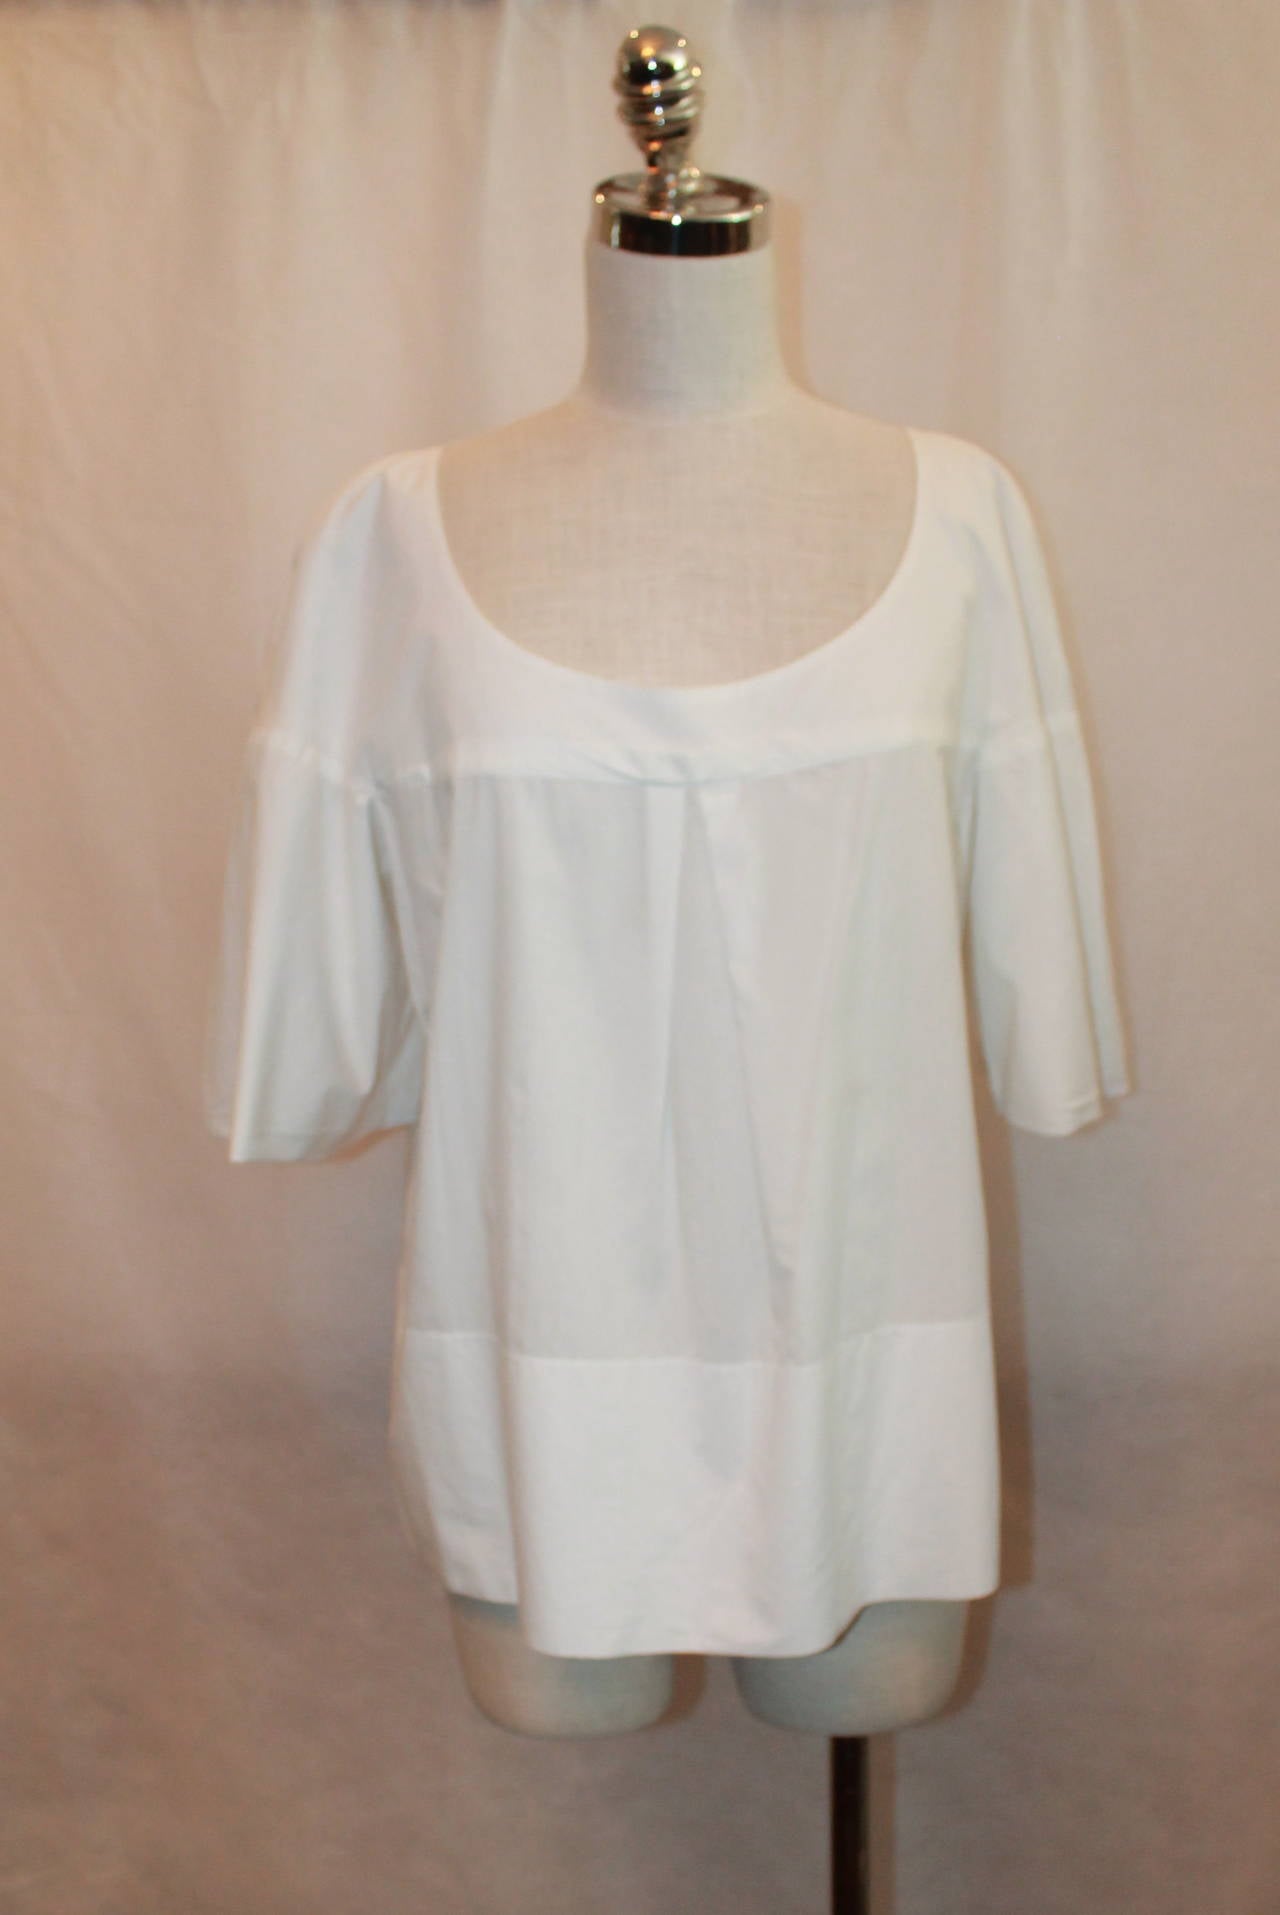 Chloe White Cotton Oversized Blouse with Slight Pleat in Front, has Sleeves. This Size 42 Top is in Excellent Condition.

Measurements:
Bust: up to 40 